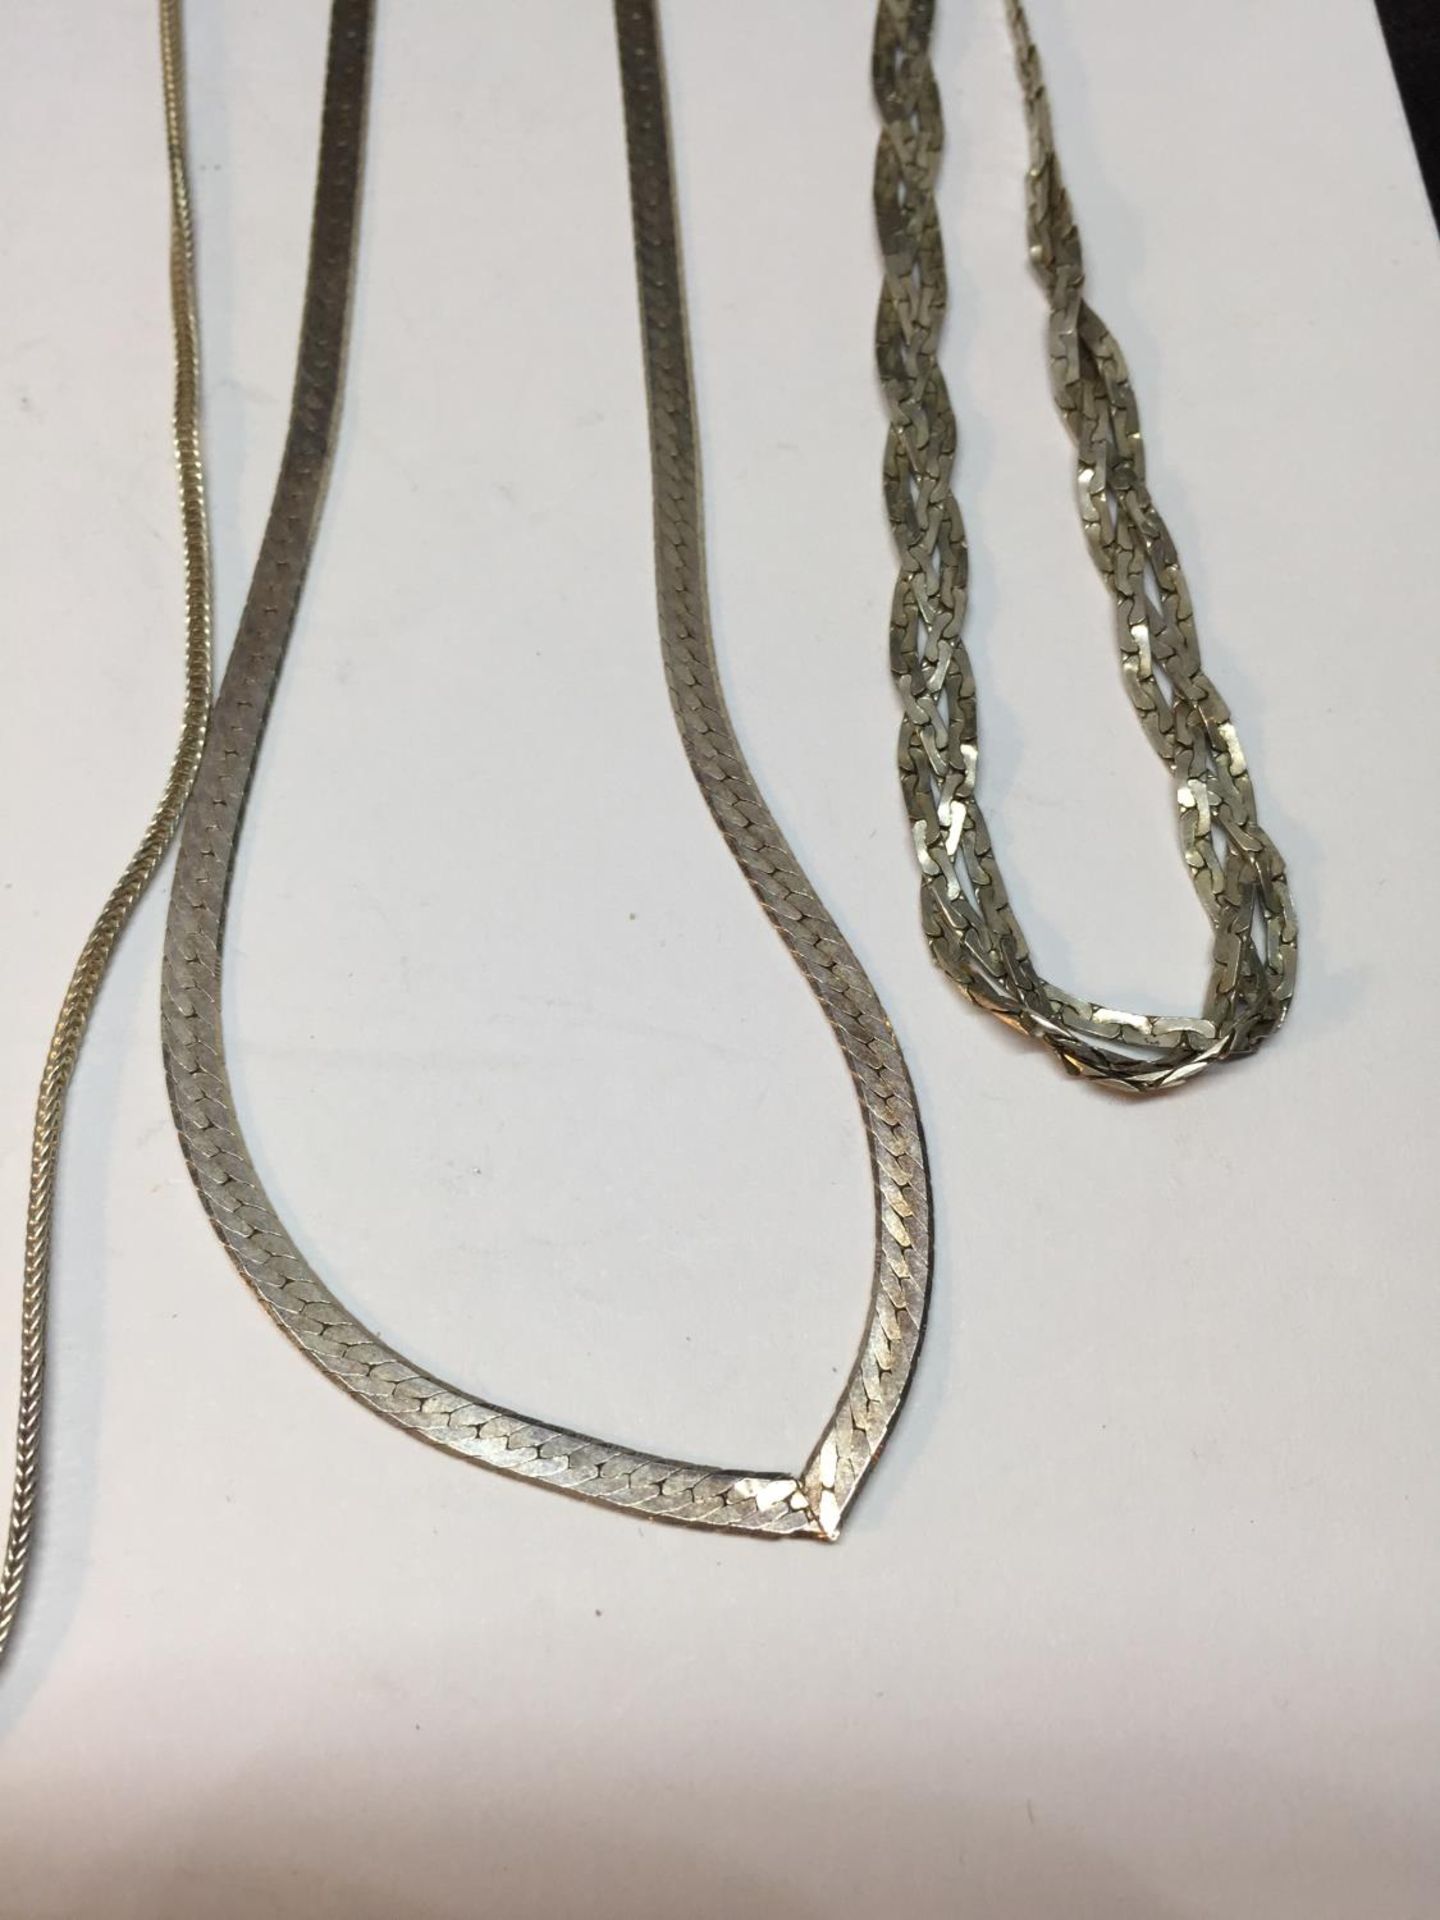 SIX SILVER NECKLACES - Image 4 of 4